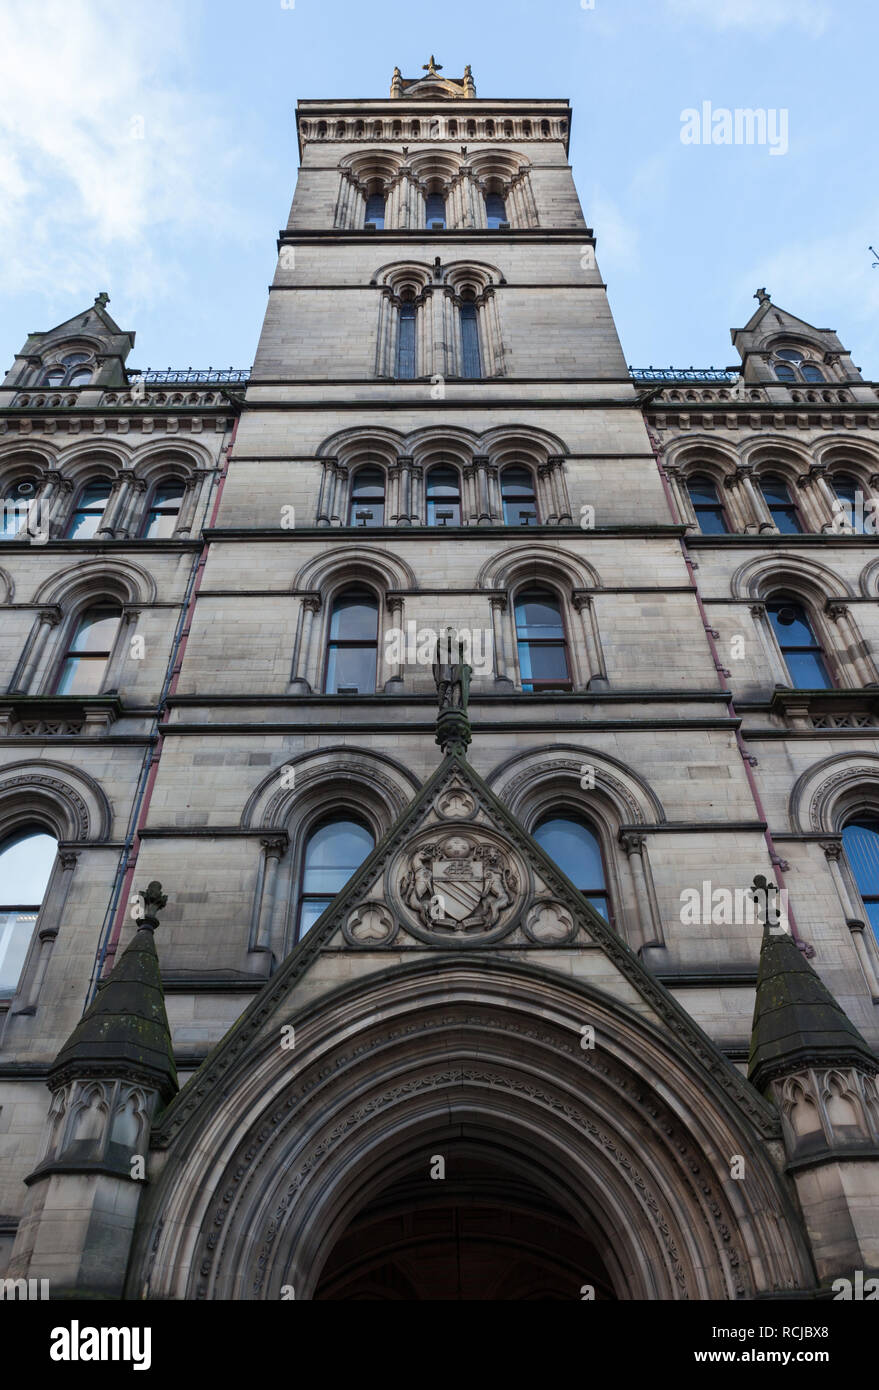 The rear of the Grade One listed Manchester Town Hall, completed in 1877 and designed by Alfred Waterhouse. Stock Photo